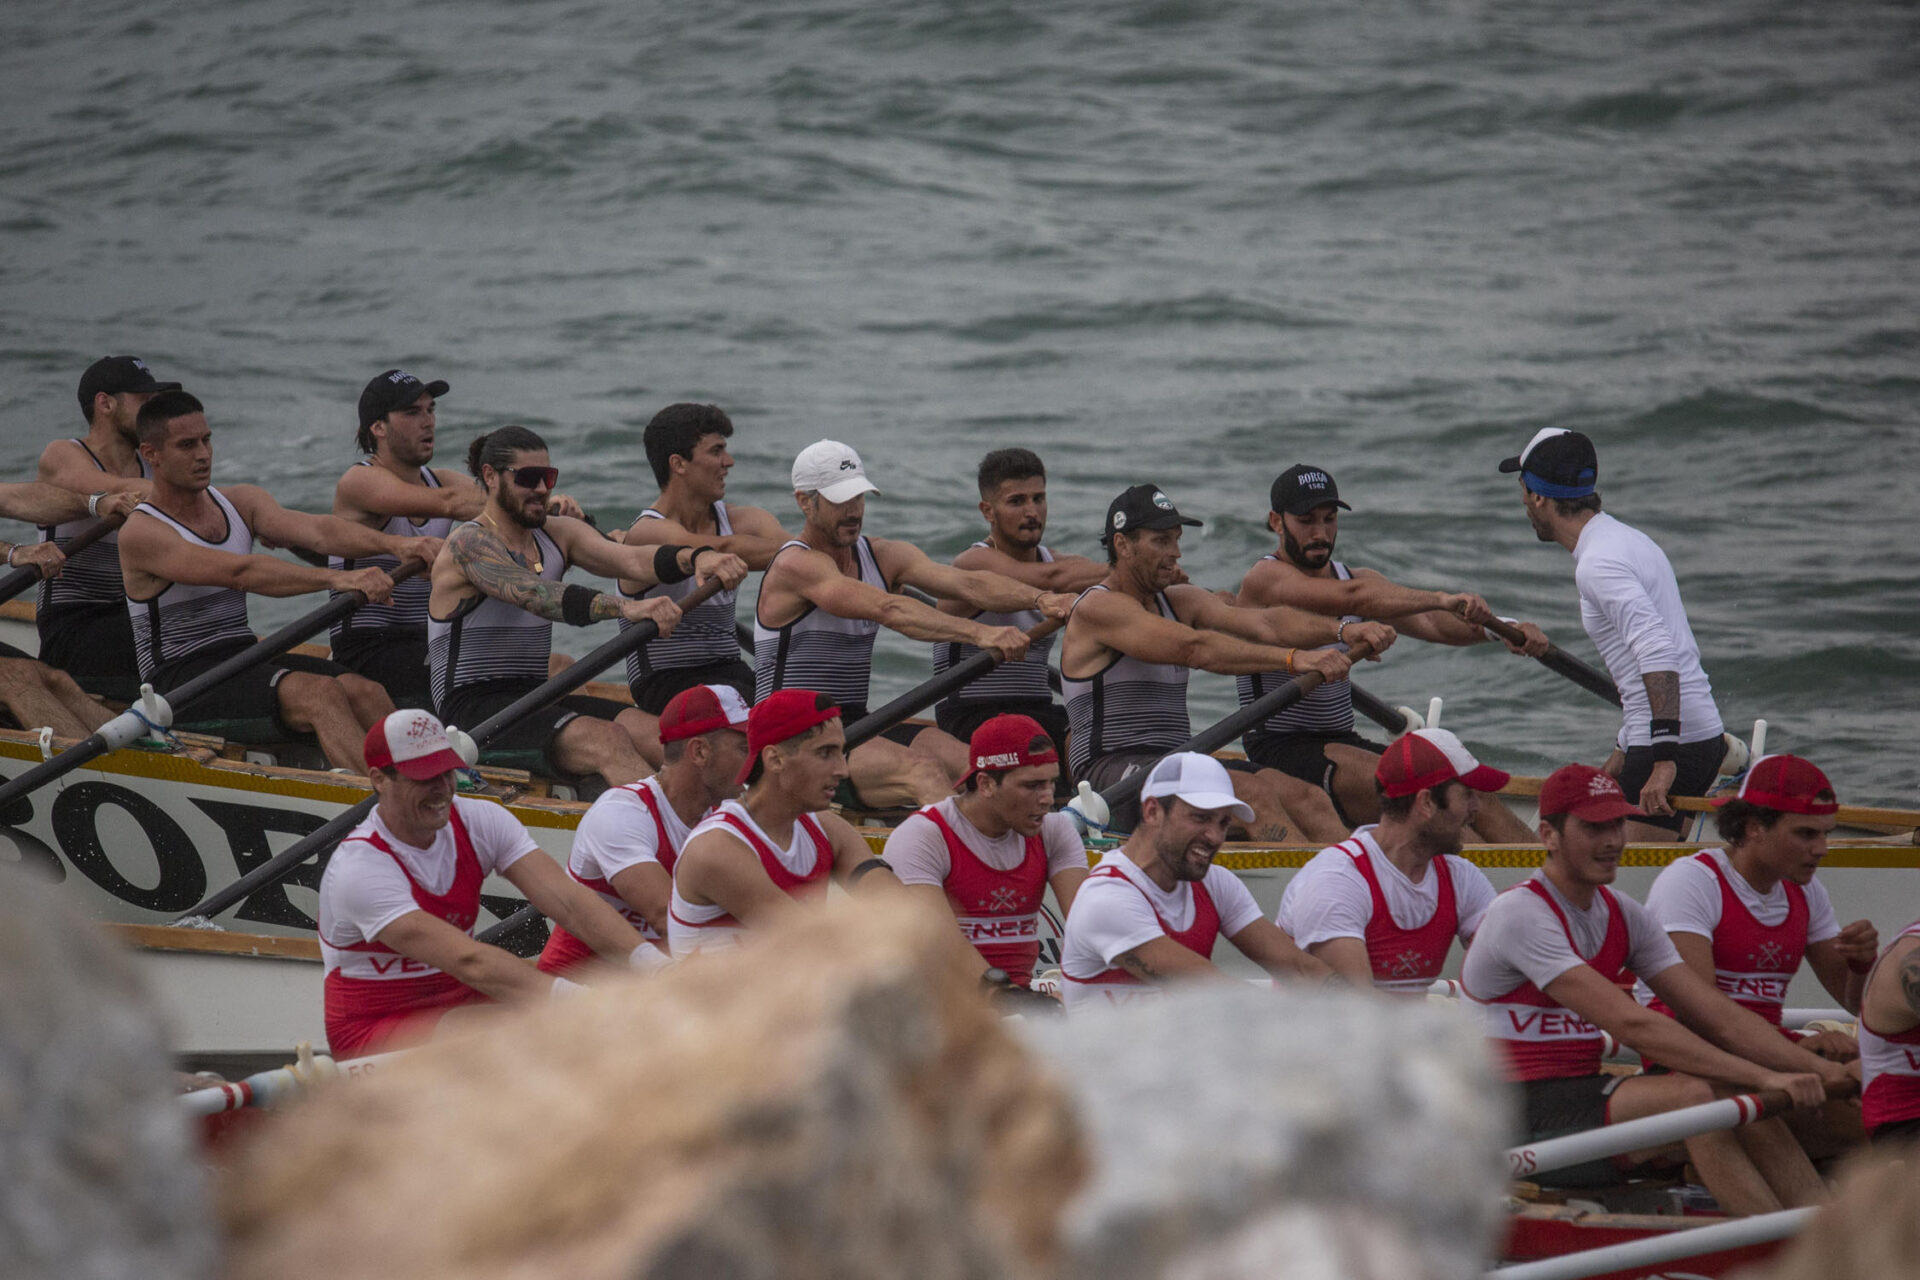 The thrill of the Livorno Rowing Races